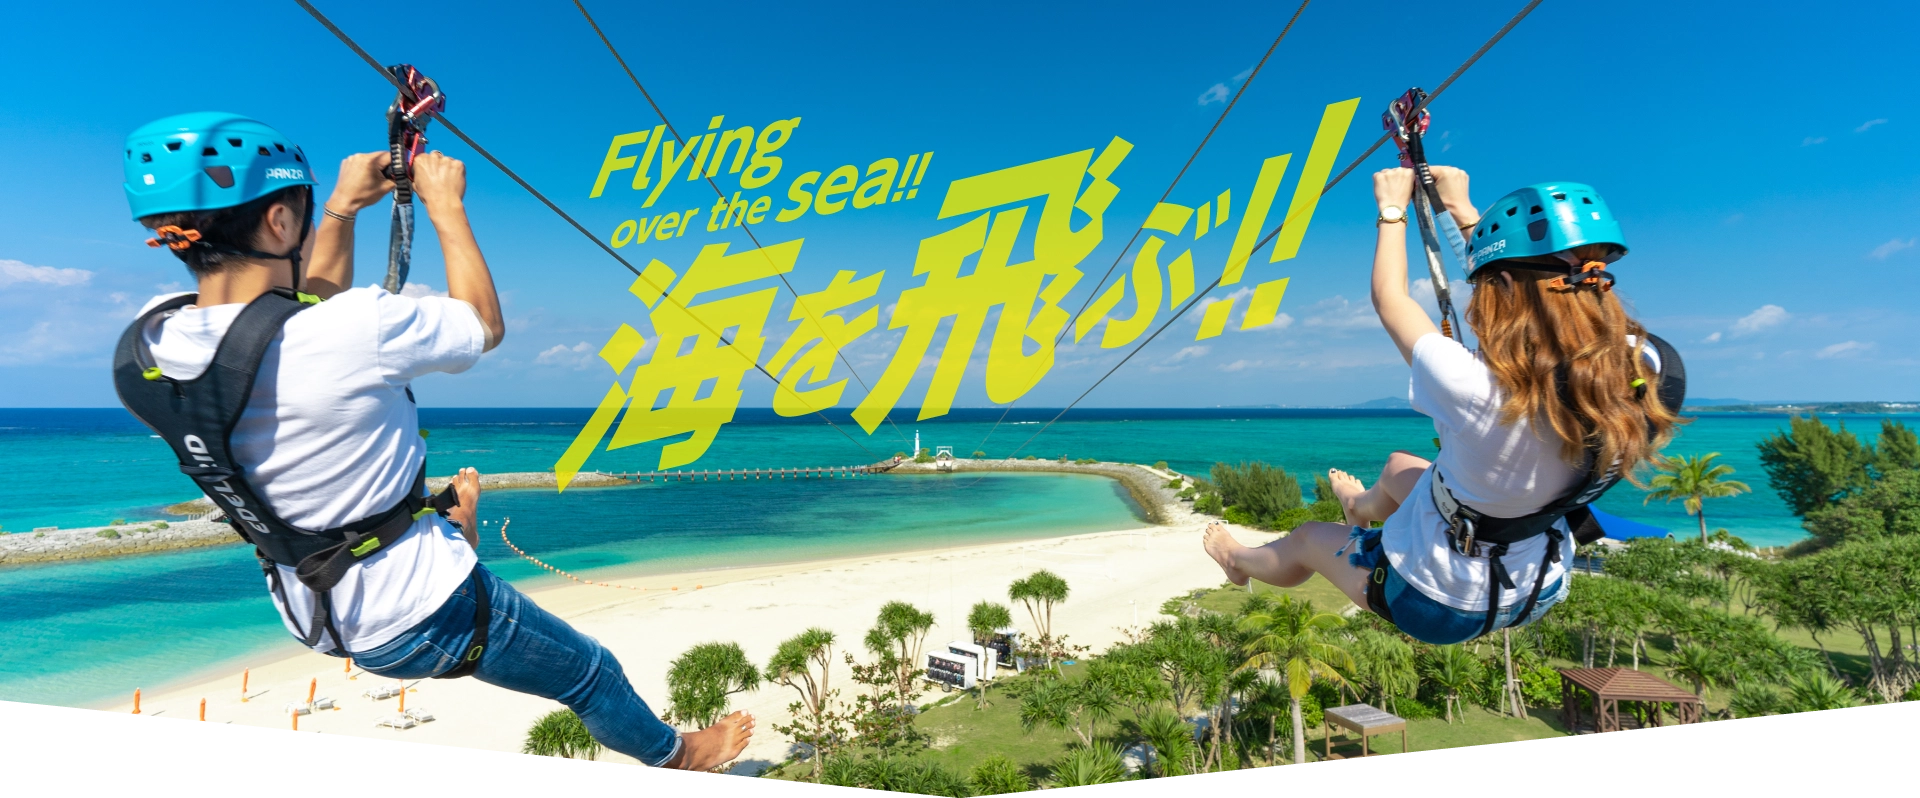 Flying over the sea!! 海を飛ぶ!!